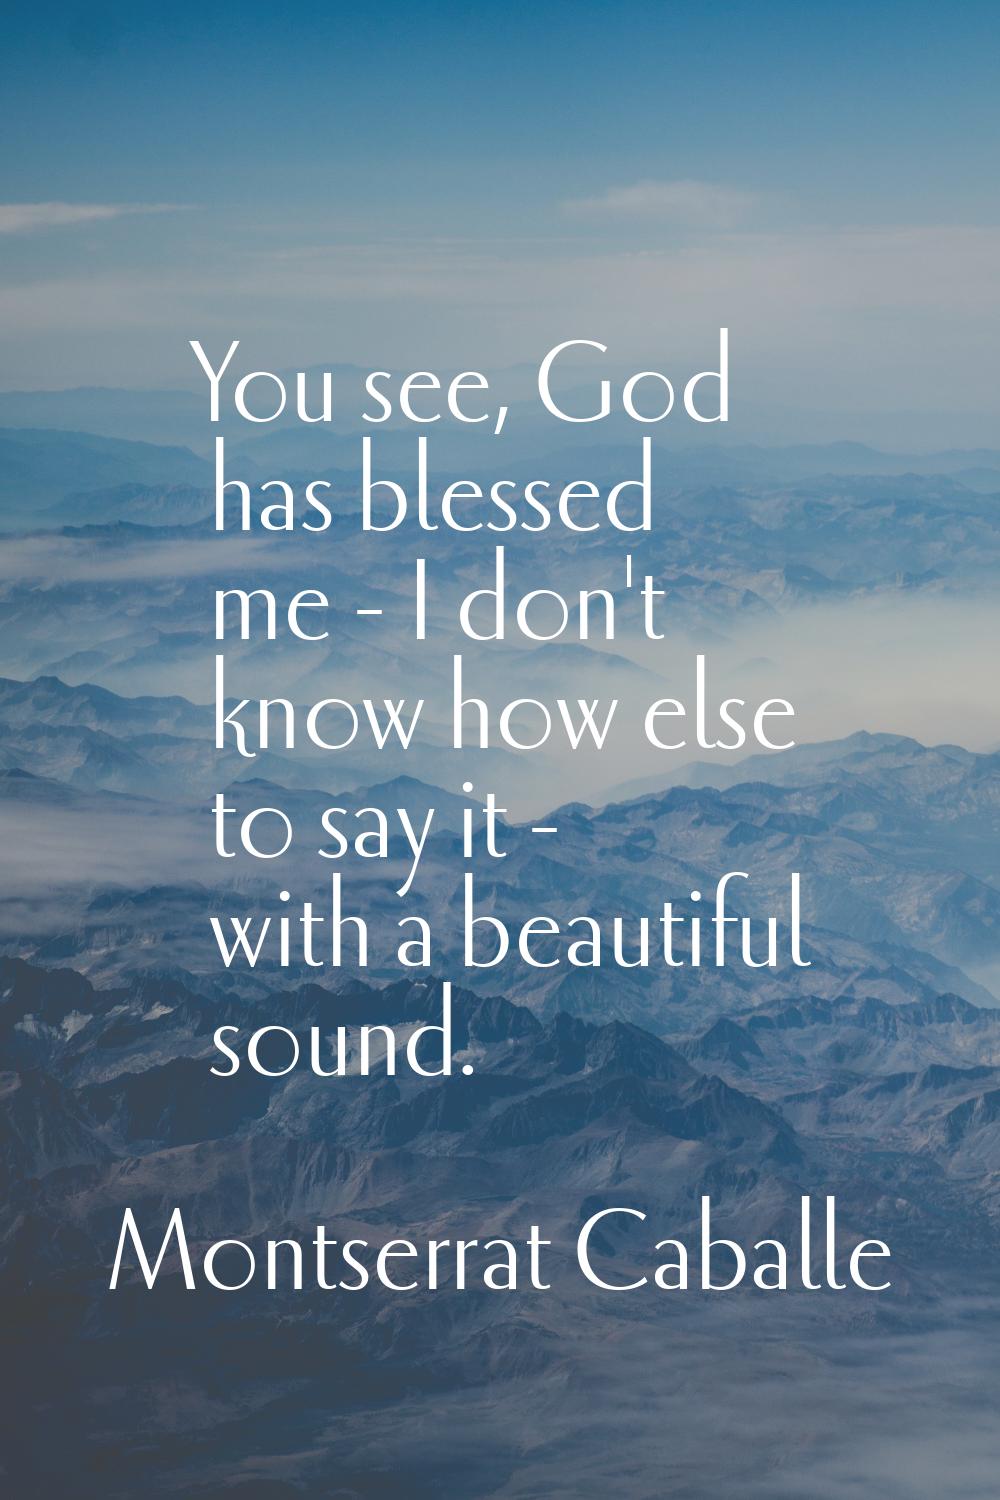 You see, God has blessed me - I don't know how else to say it - with a beautiful sound.